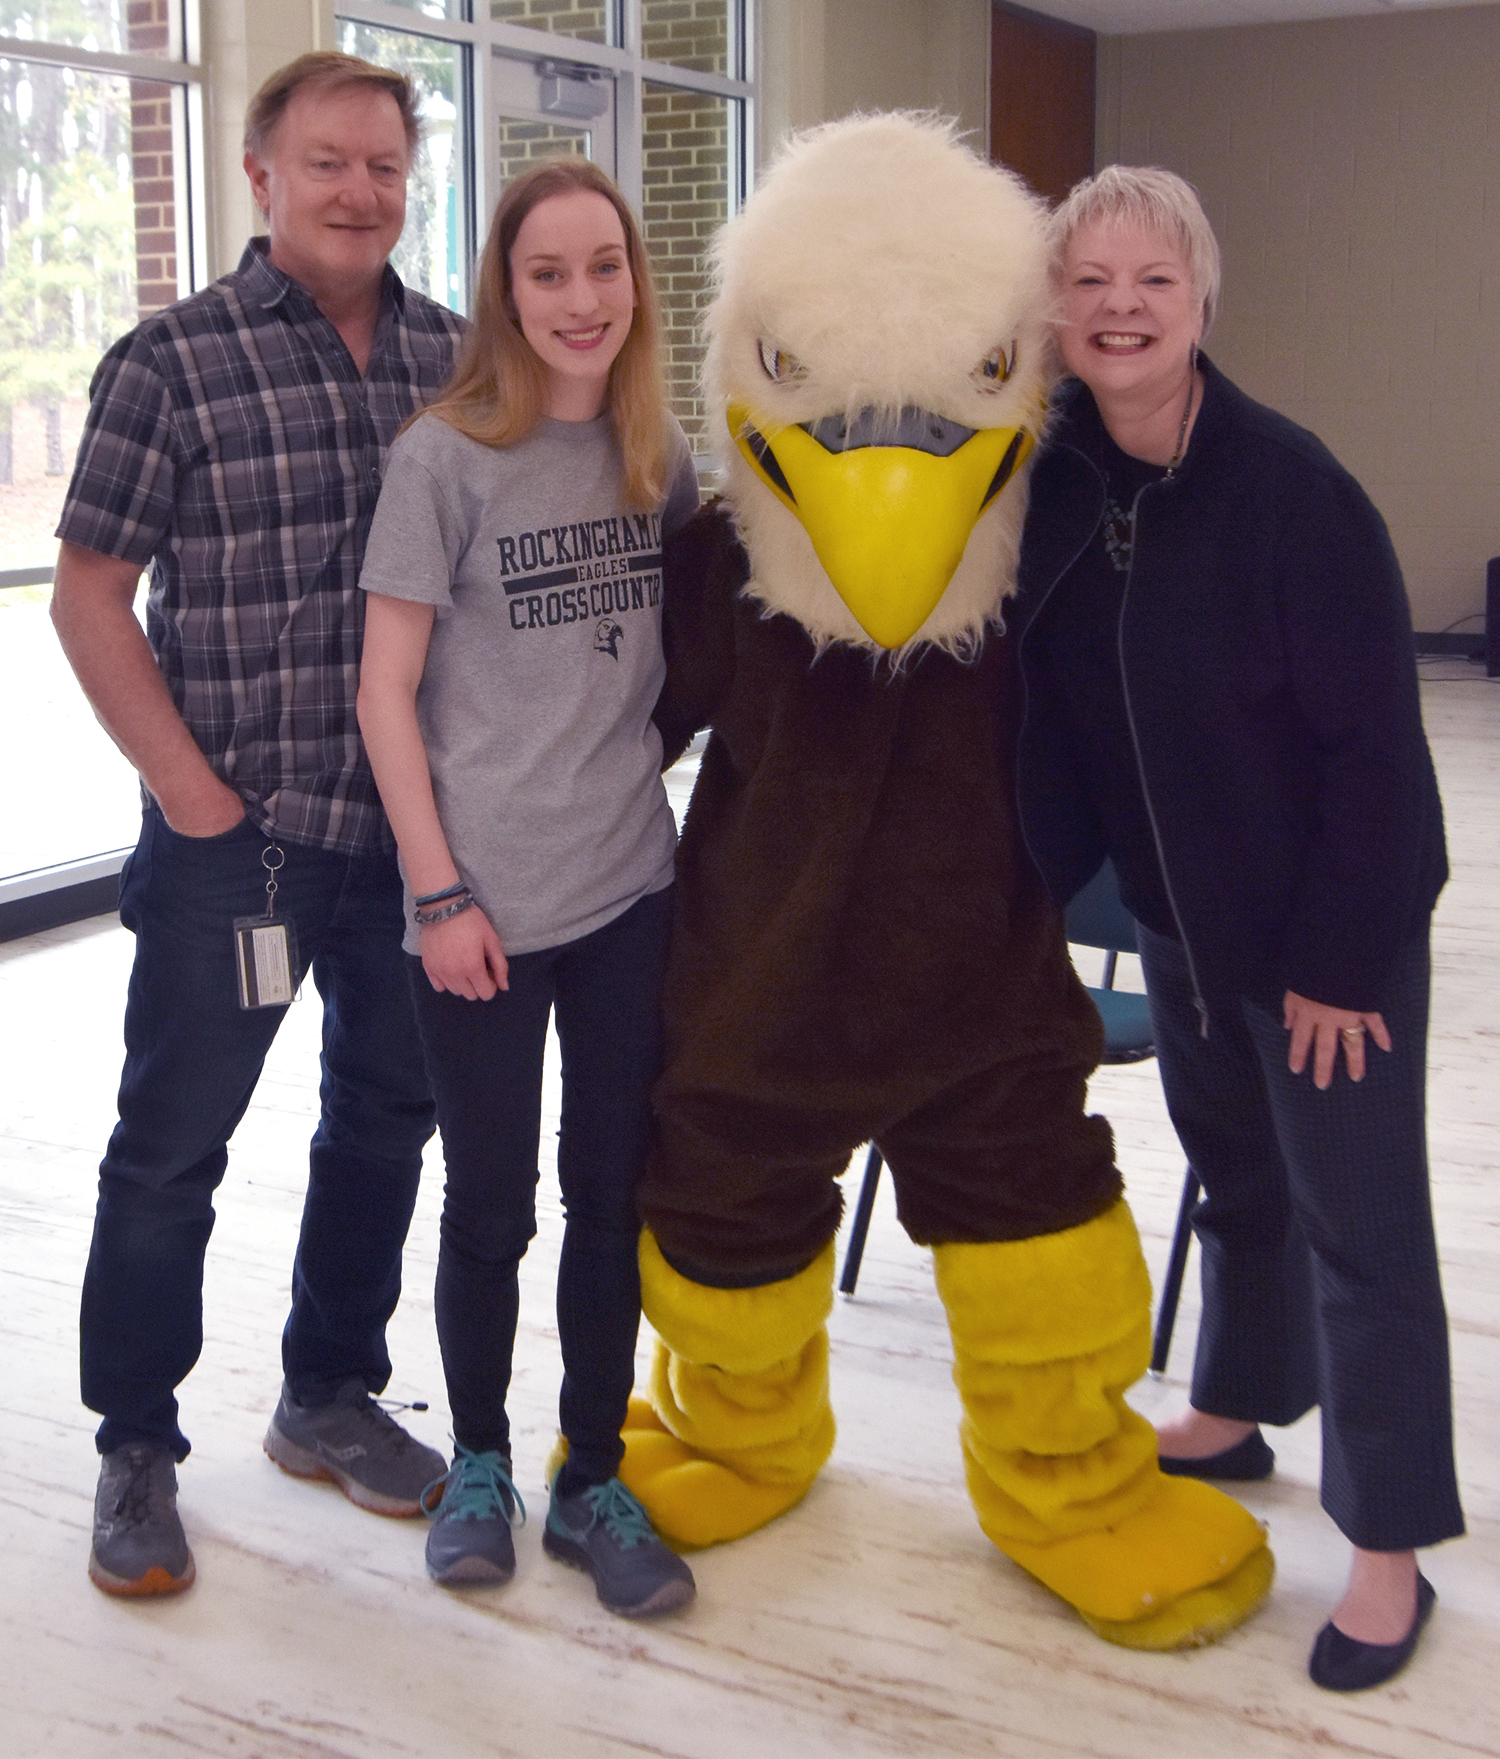 Cross country student athlete with her parents and mascot.